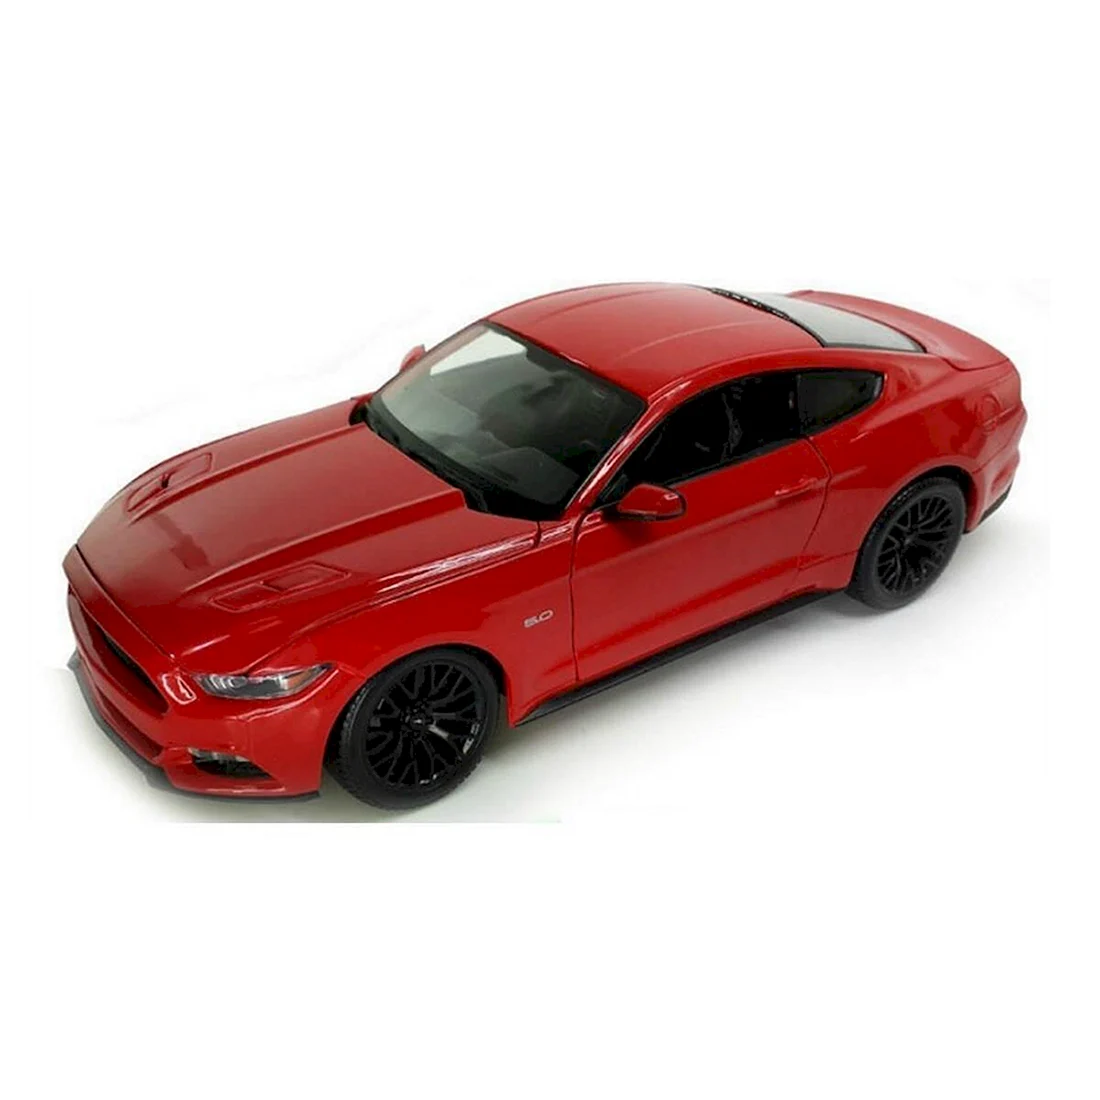 Maisto Ford Mustang gt 2015 118